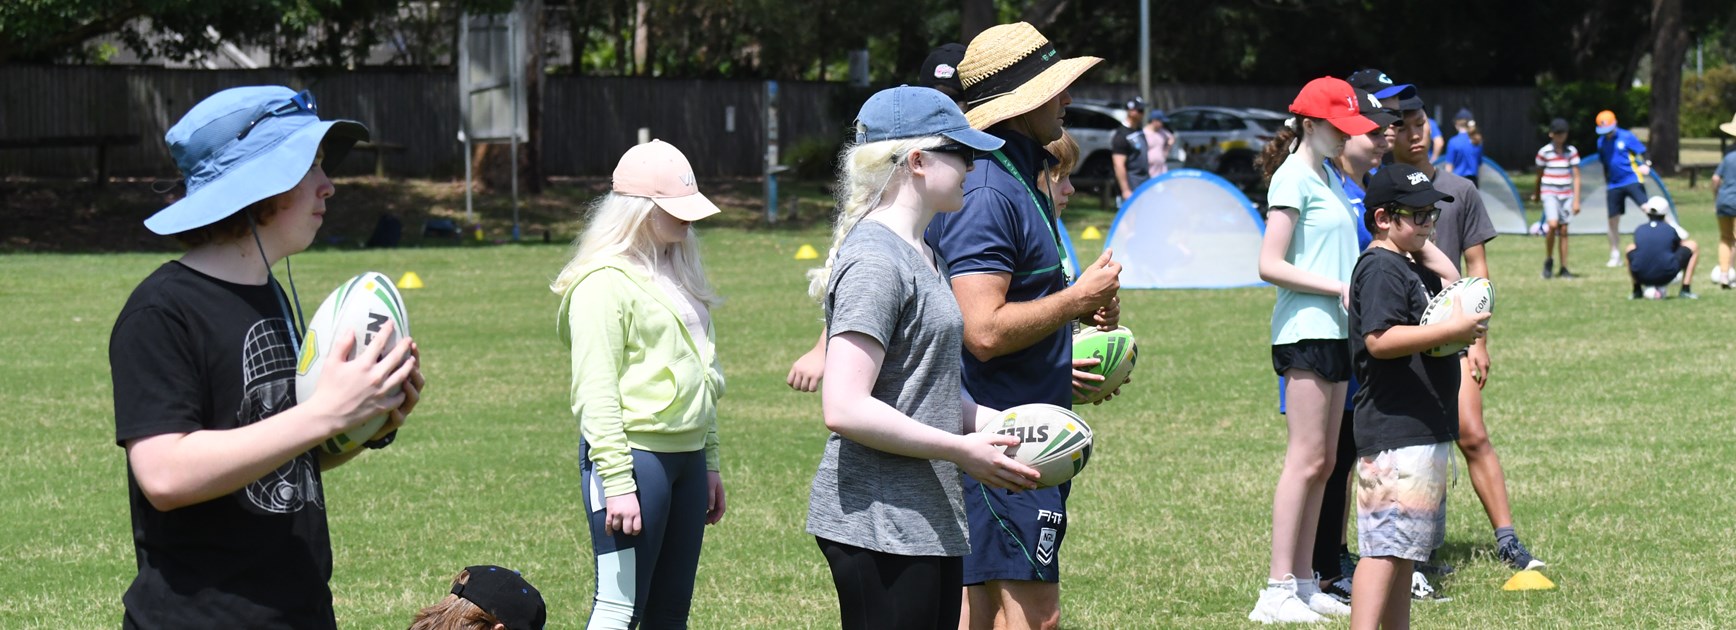 Vision Impaired Students Try Rugby League